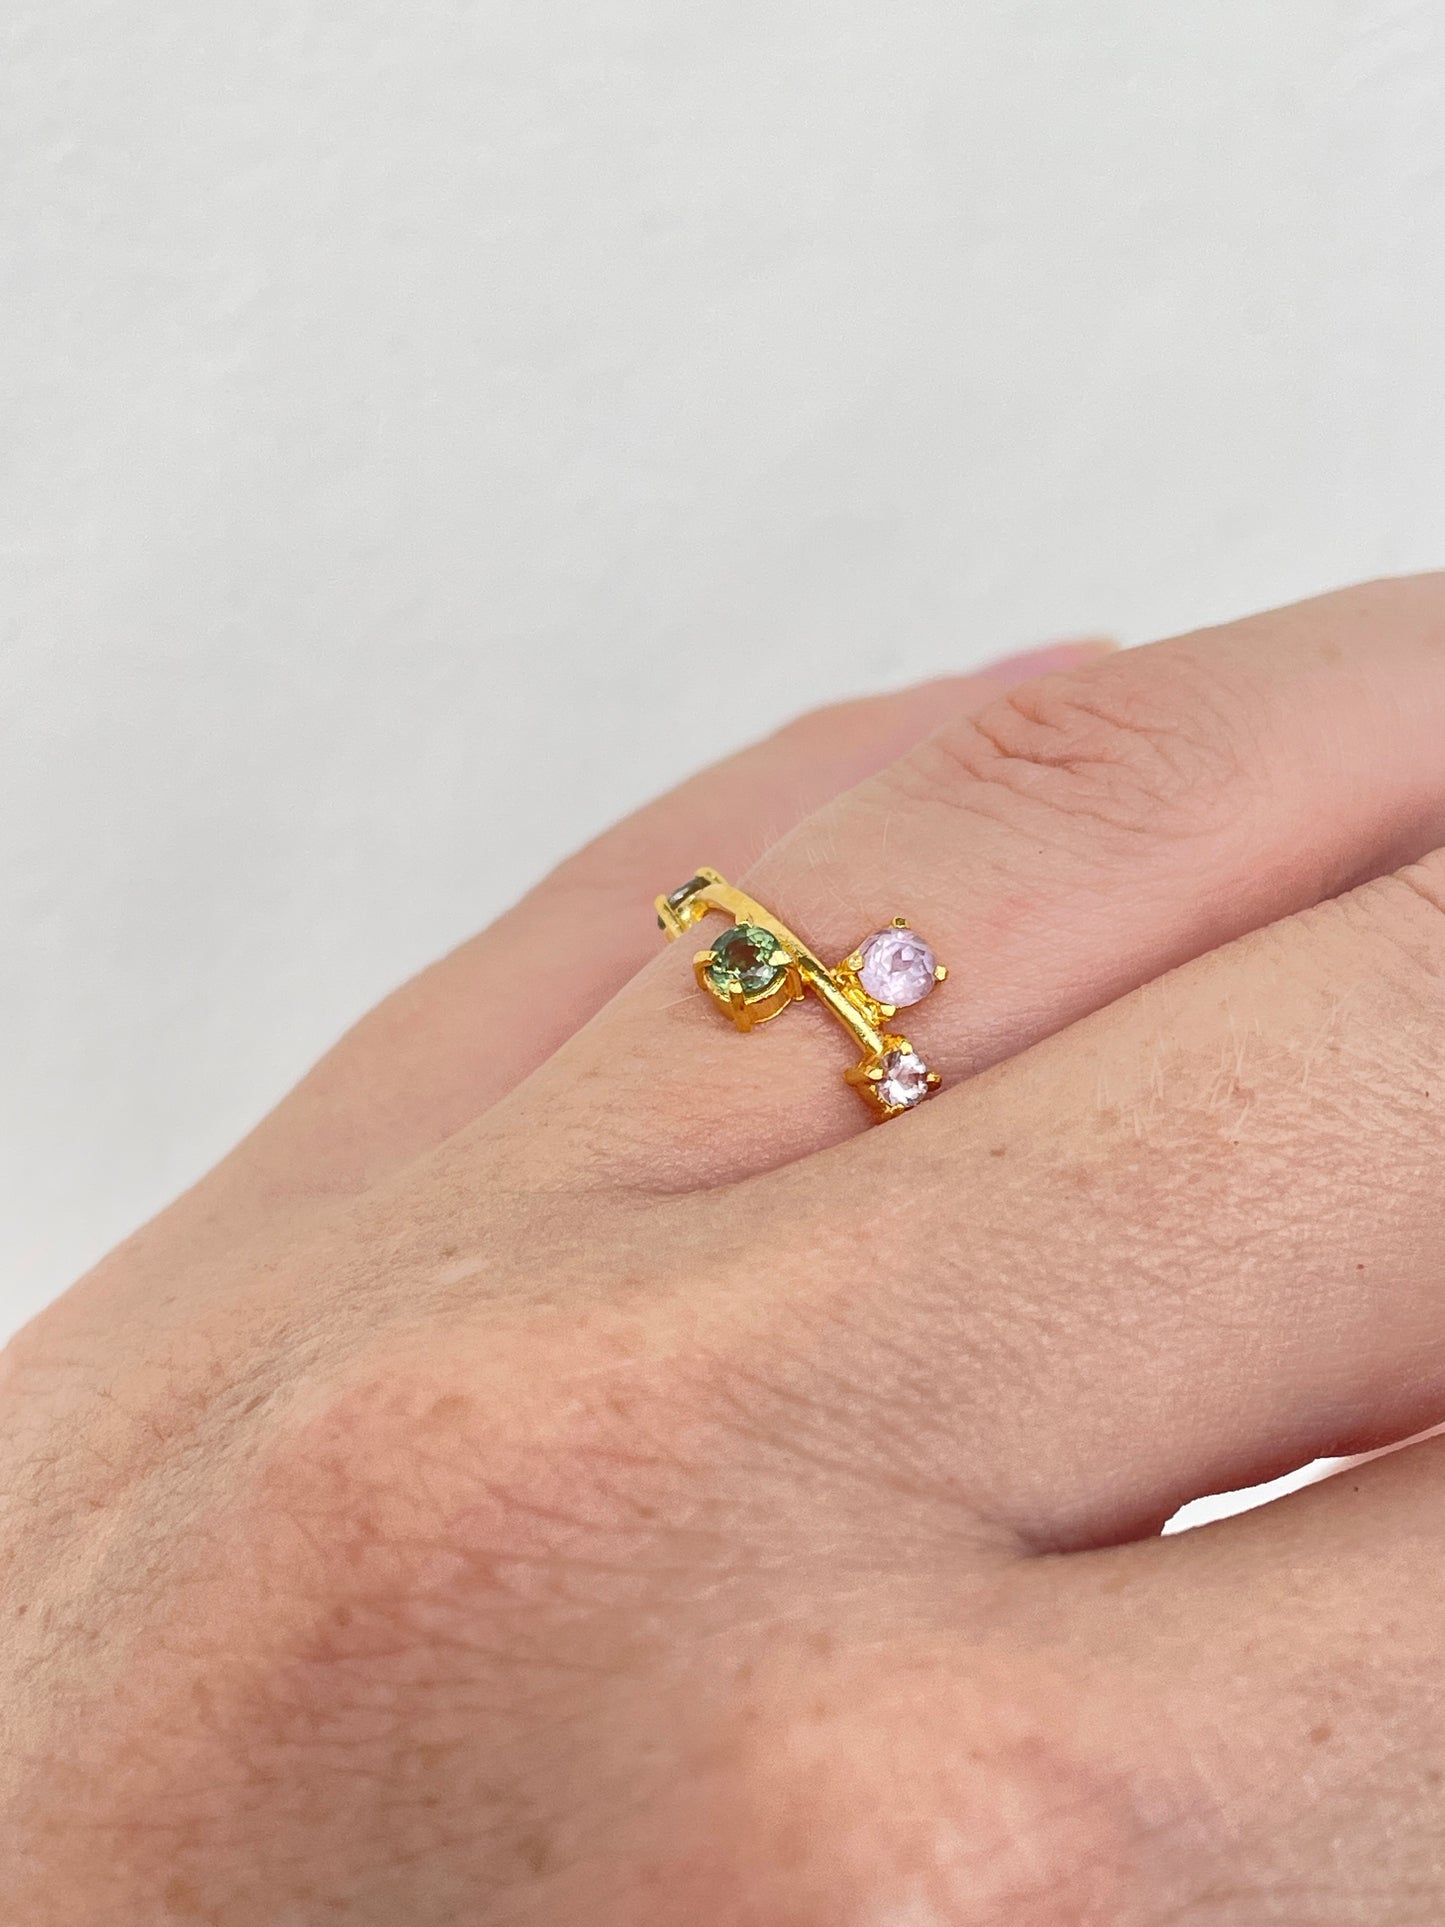 Galaxy Ring Gold with Pink & Green Tourmalines - size 6.5